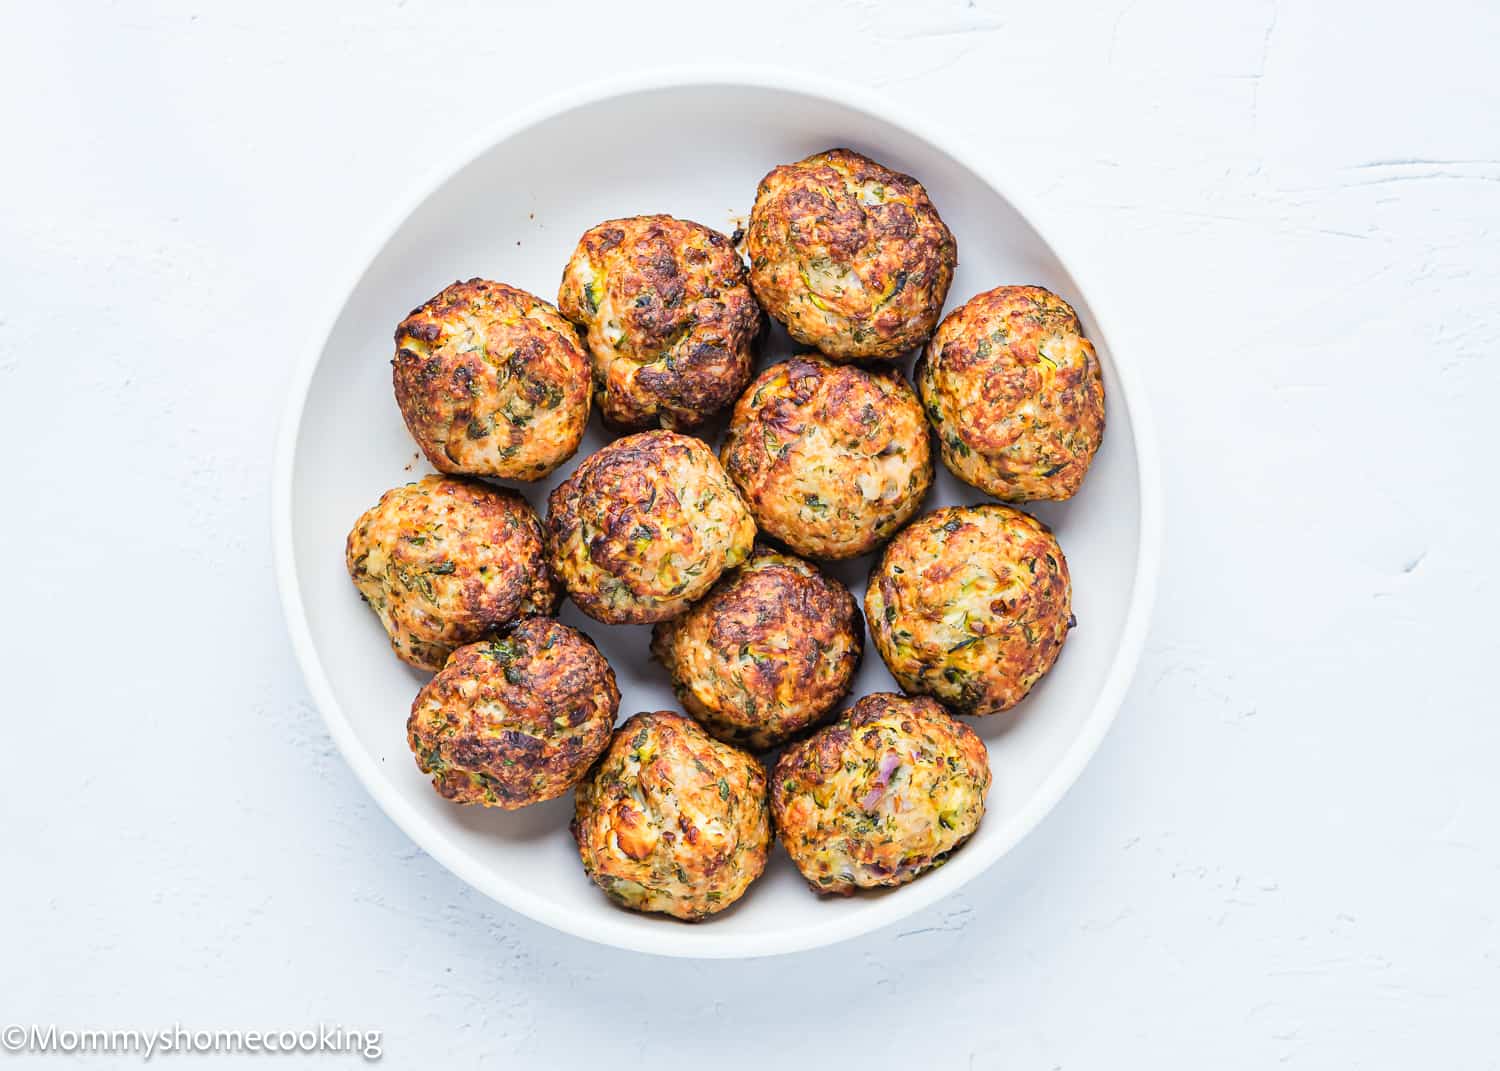 cooked egg-free meatballs in a plate.